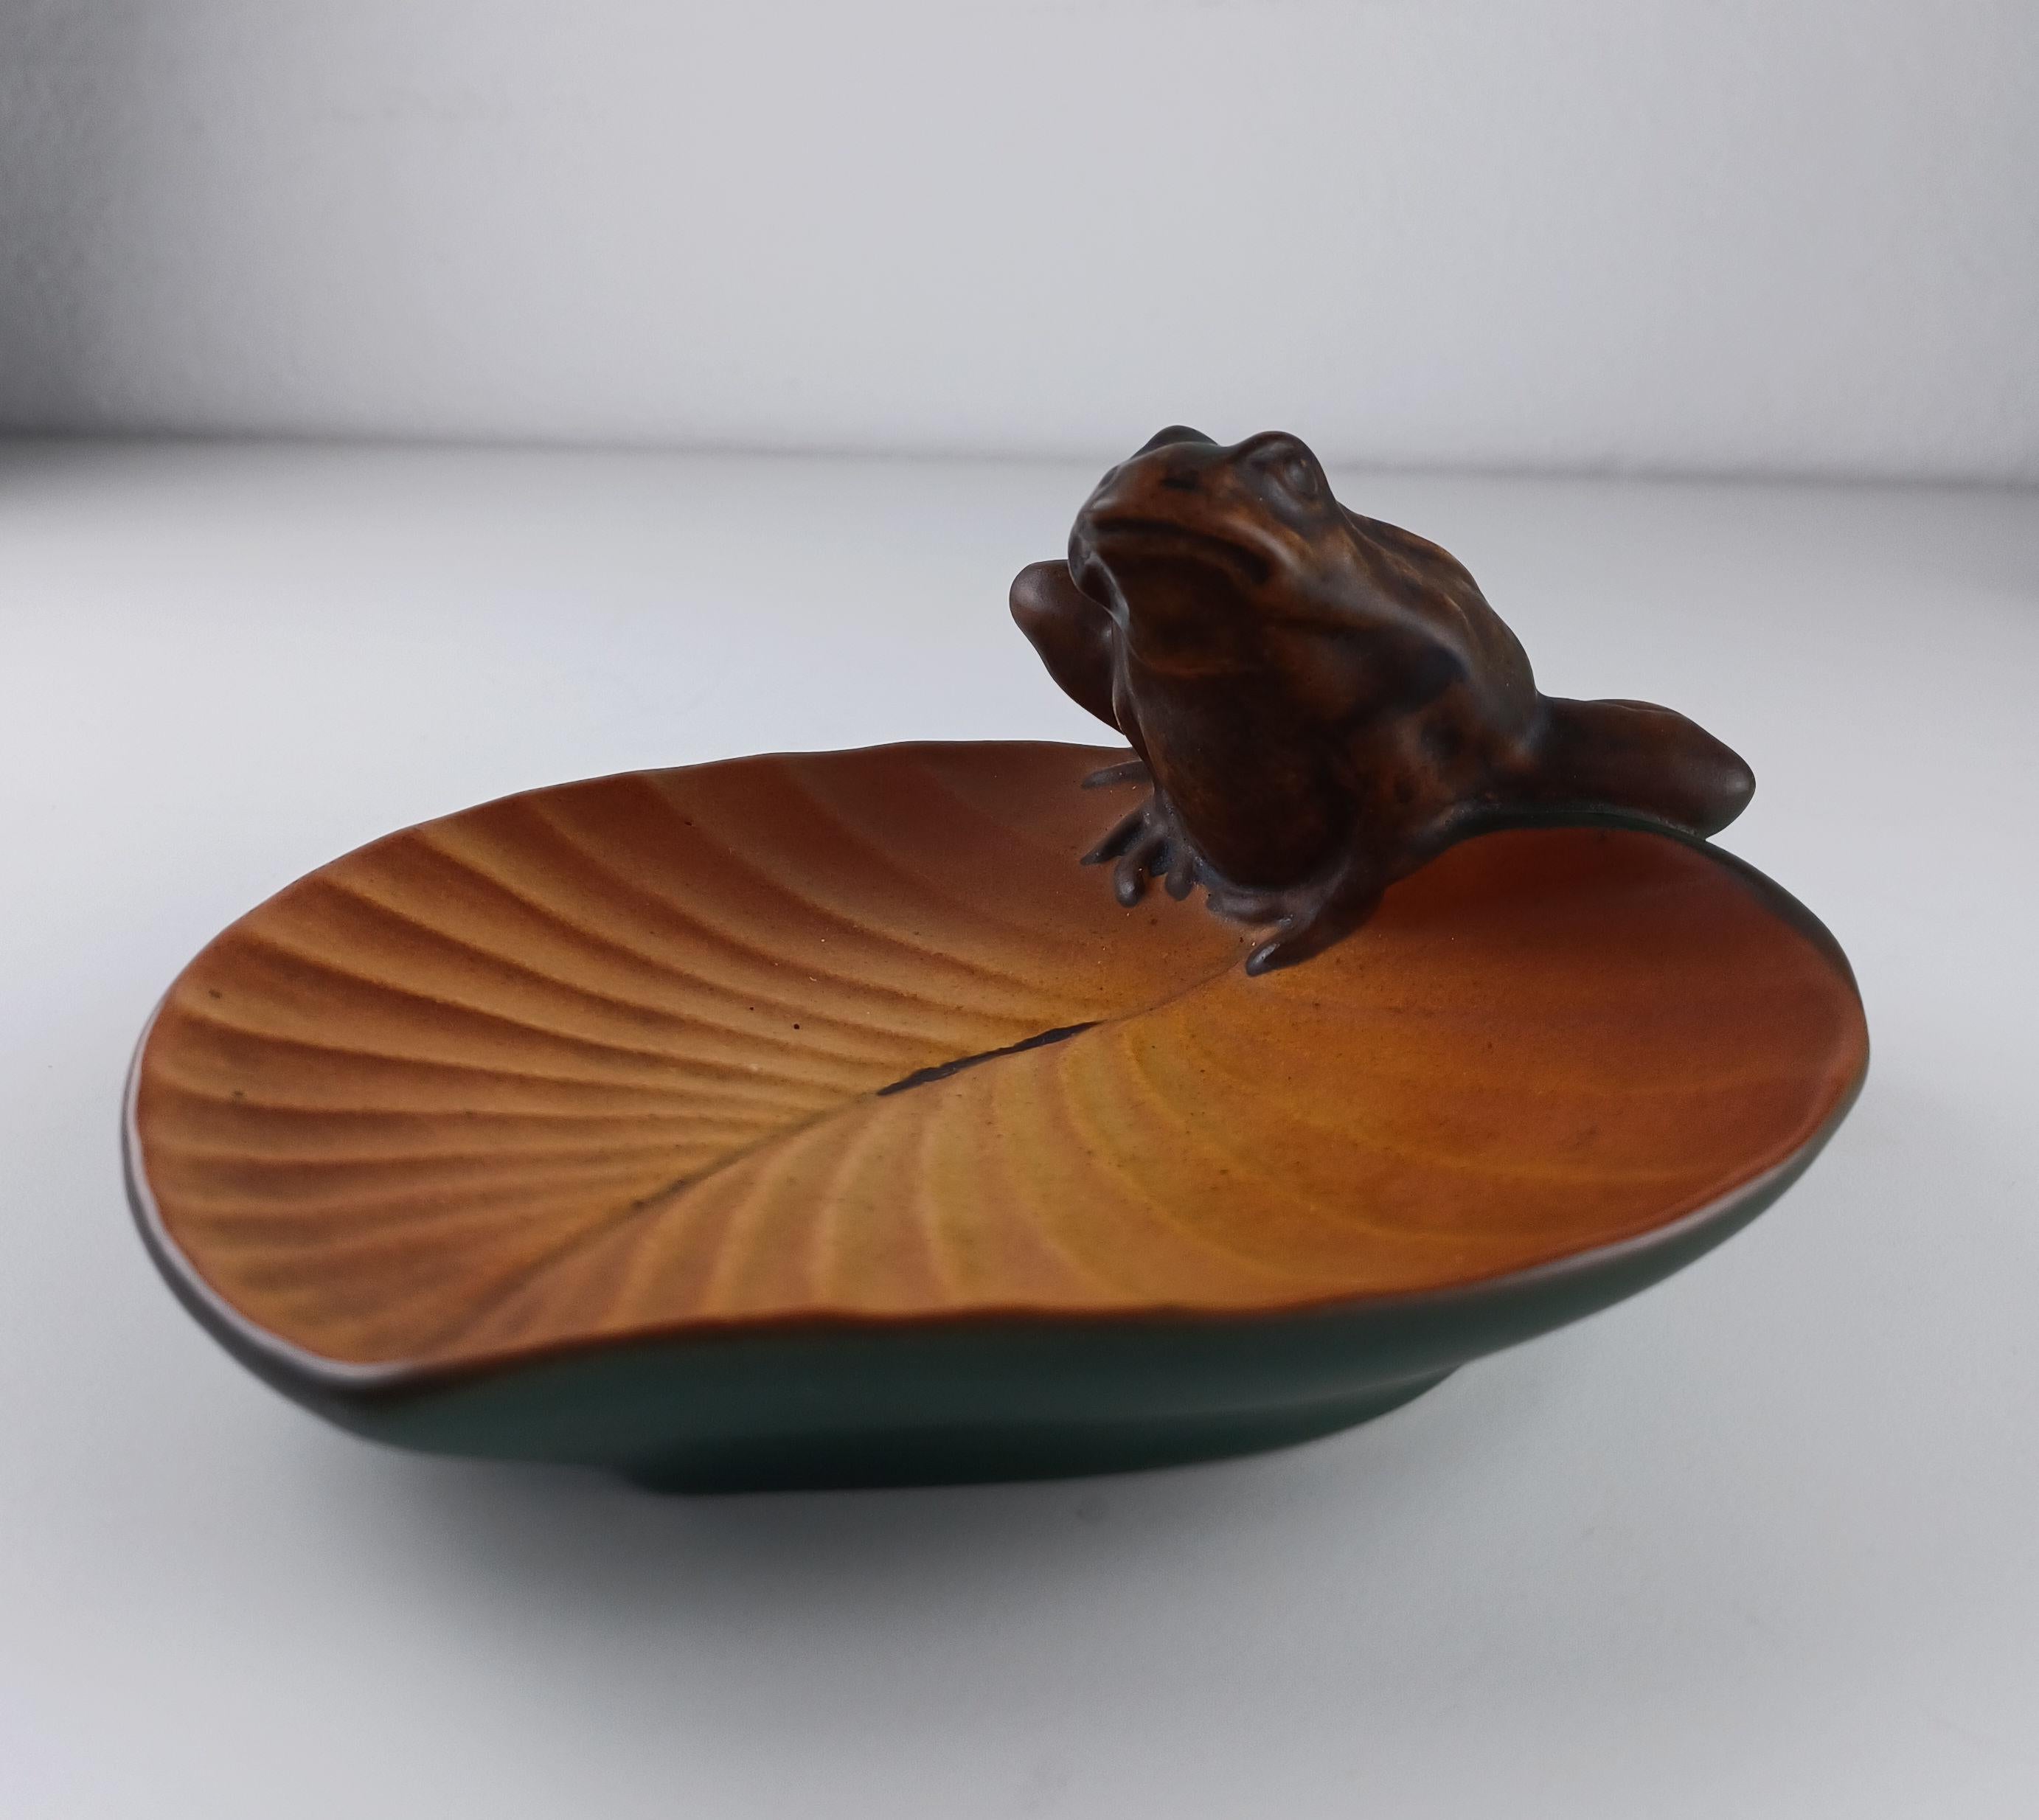 1920's Danish Art Nouveau handcrafted frog dish / ash tray by P. Ipsens Enke

The handcrafted art nuveau dish/ash tray was designed in 1929 by Axel Sørensen as ash tray and is in very good vintage condition condition.

Ipsens Enke (1843 - 1955) was